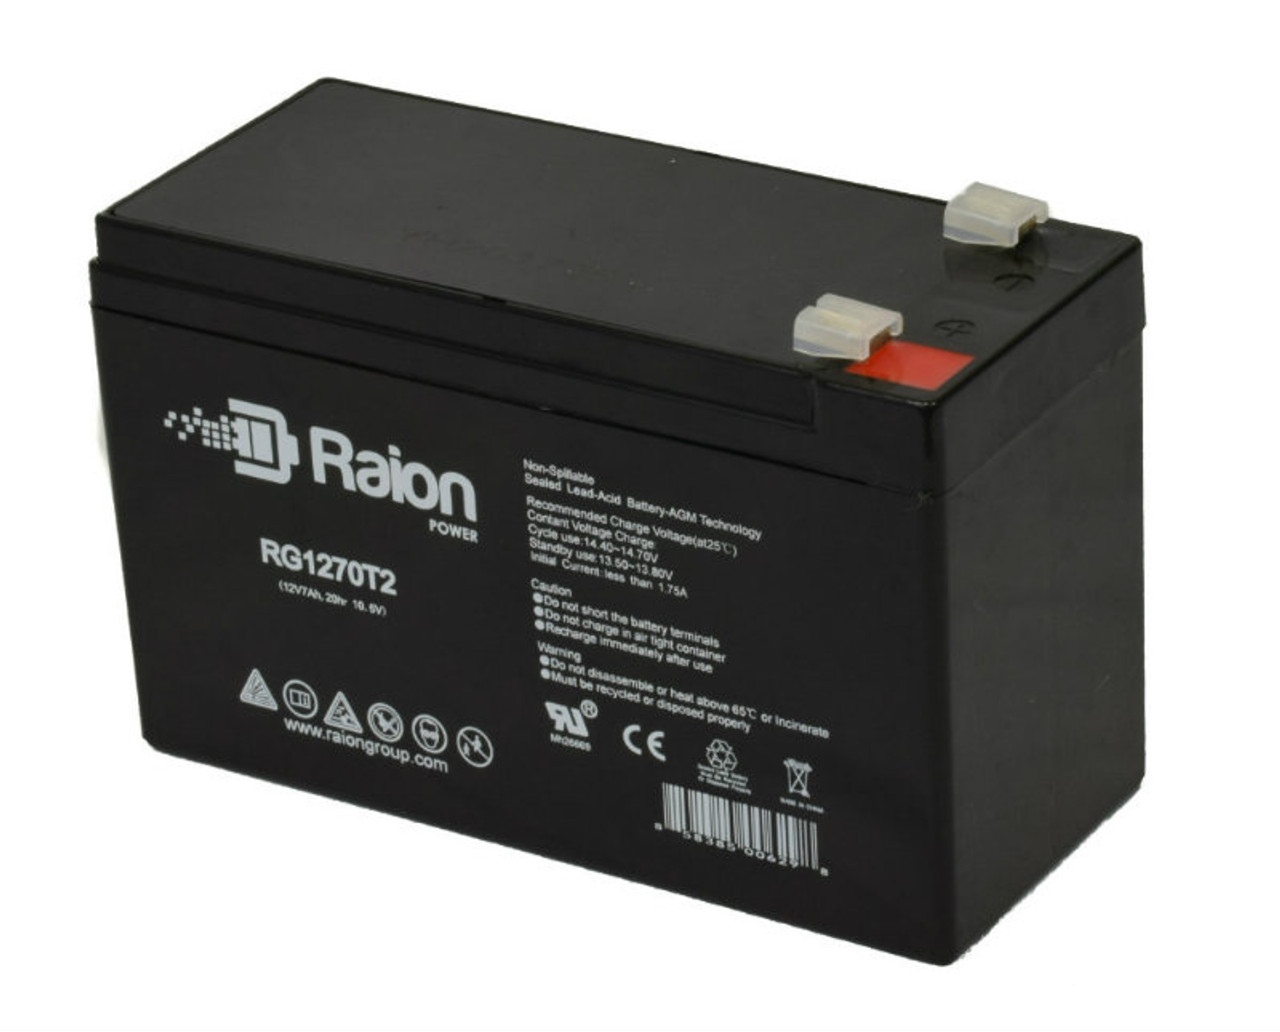 Raion Power Replacement 12V 7Ah RG1270T1 Fire Alarm Battery for Altronix SMP5PMP16CB